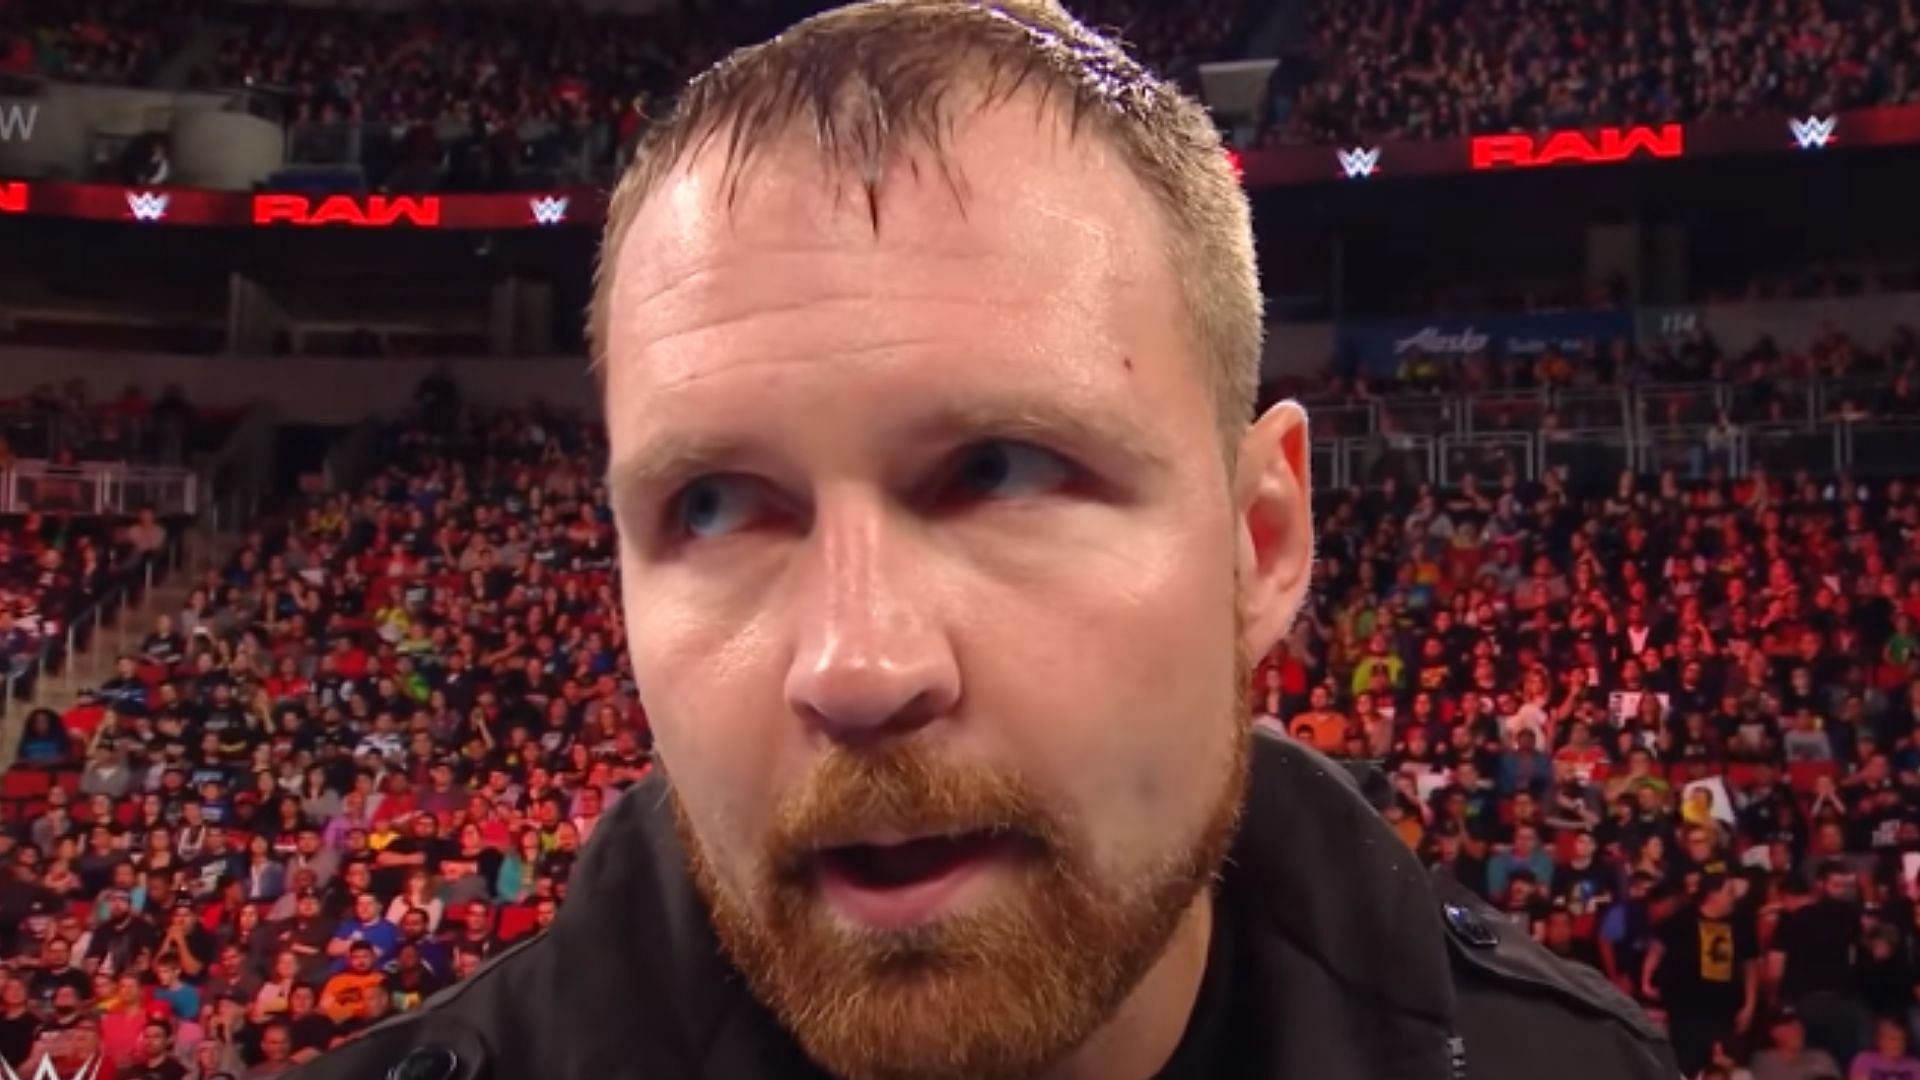 Jon Moxley performed as Dean Ambrose in WWE